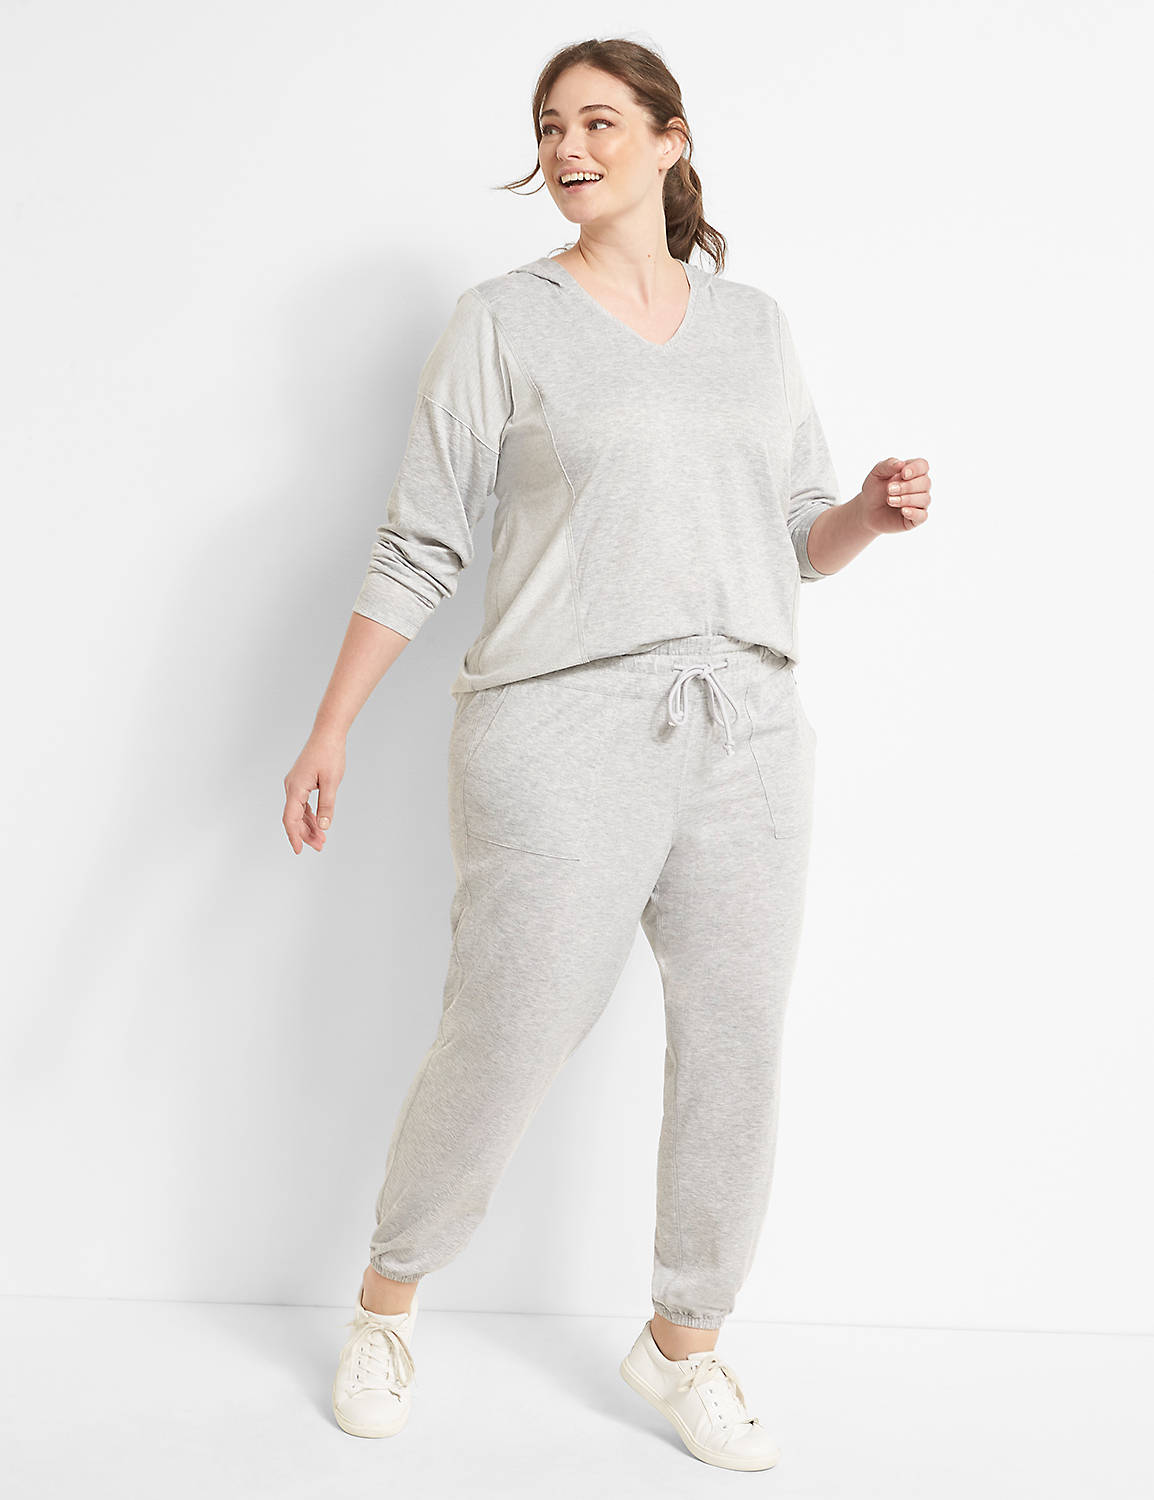 LIVI French Terry Jogger Product Image 3